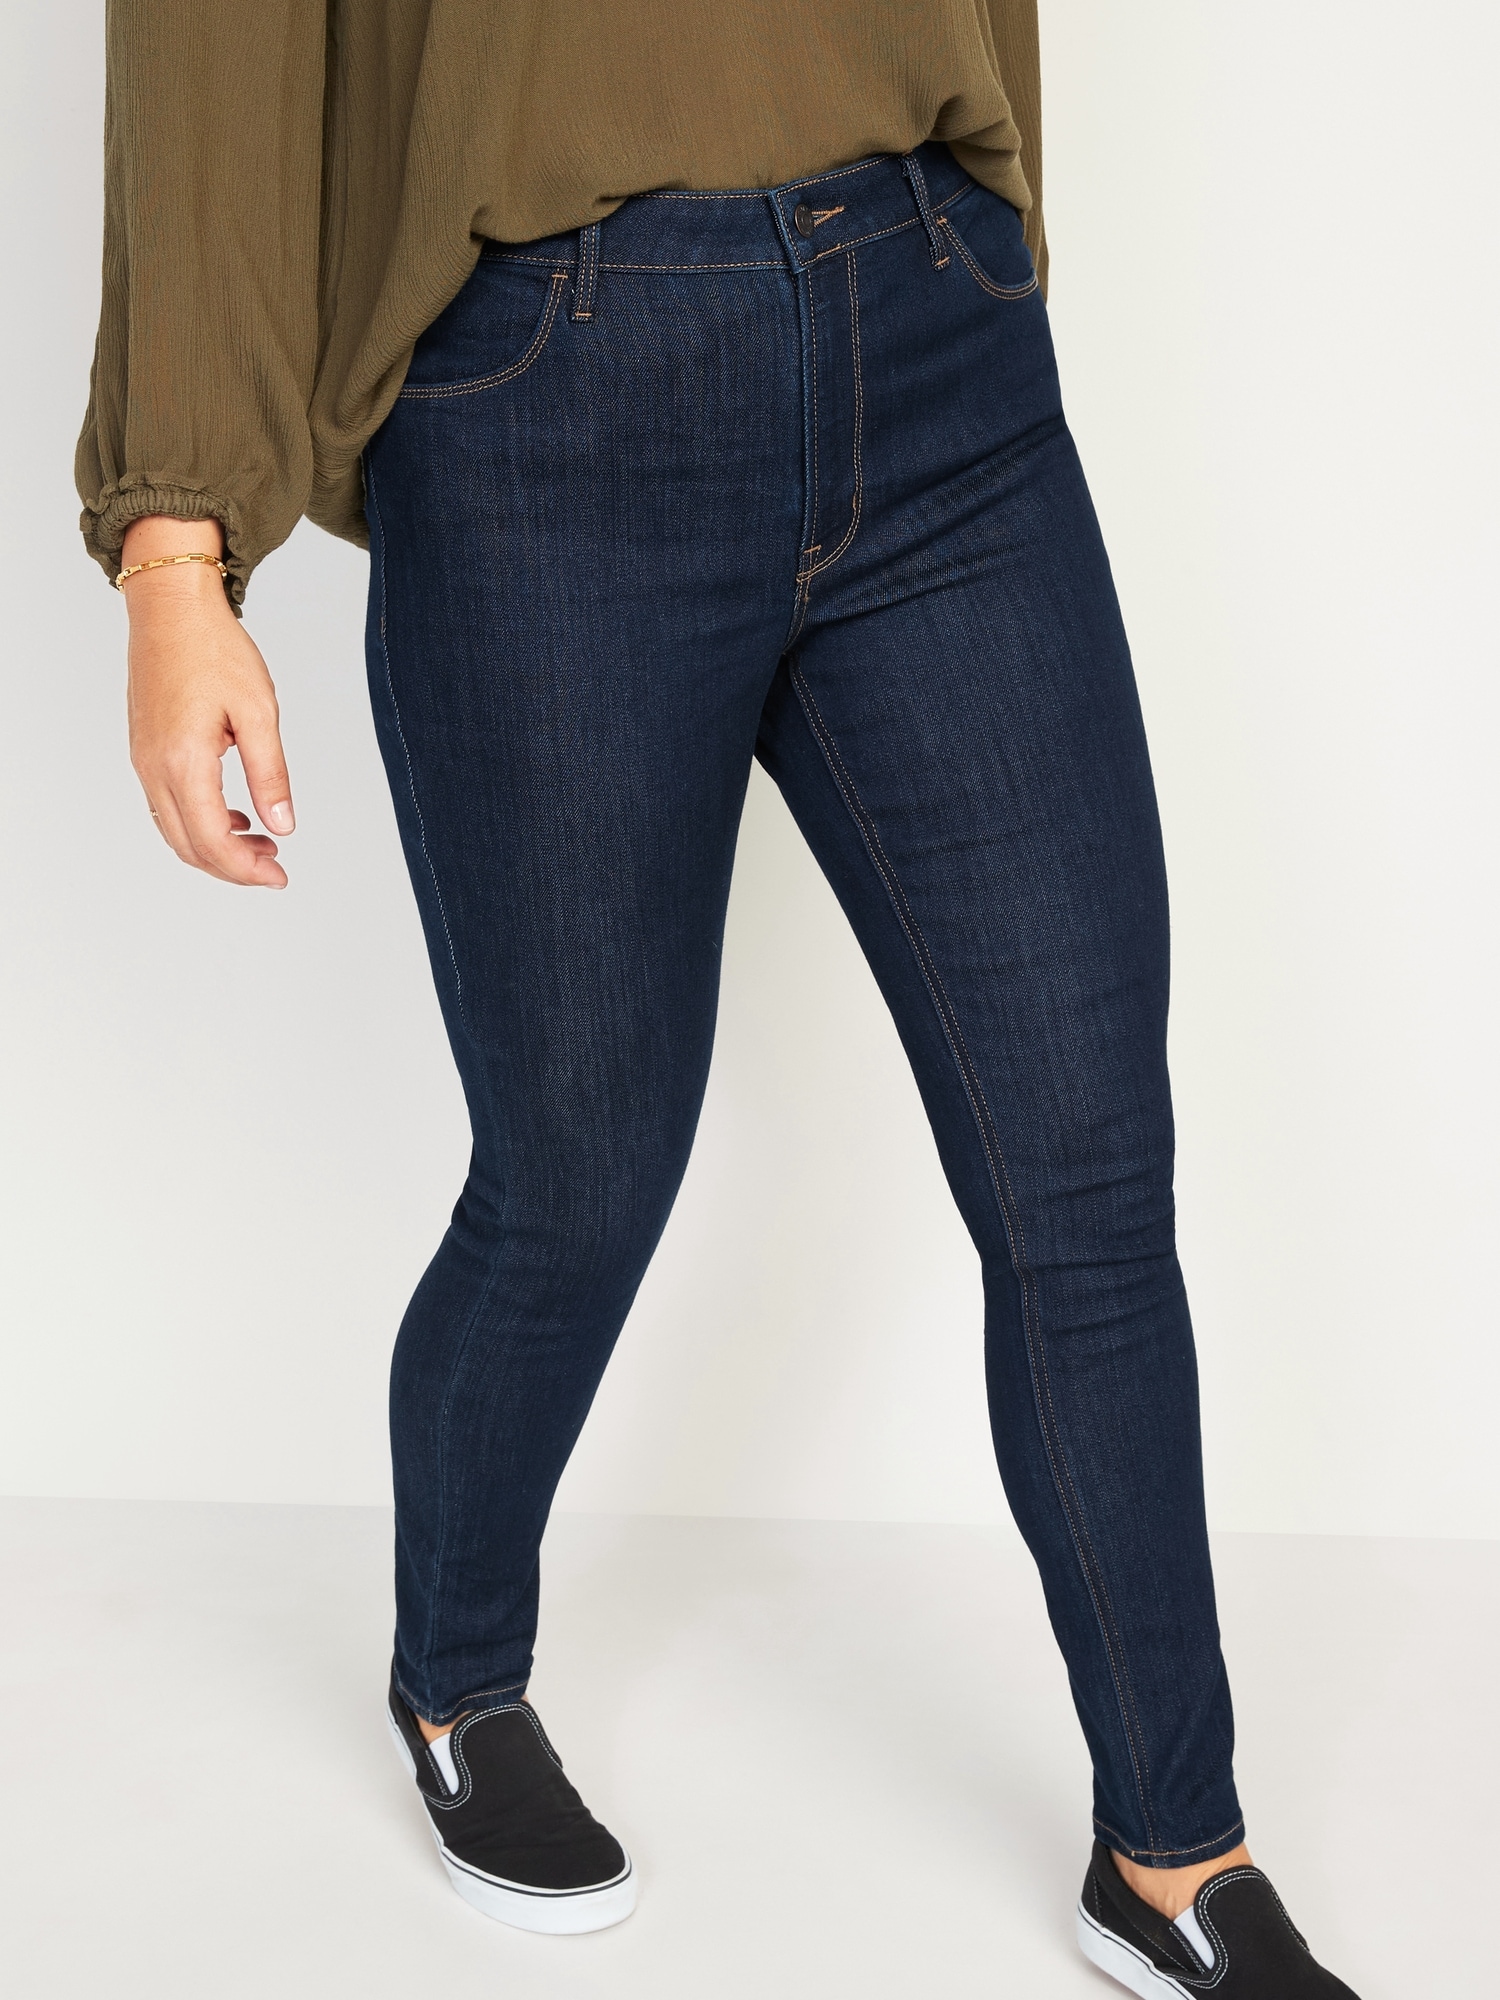 High Waisted Wow Super Skinny Jeans For Women Old Navy